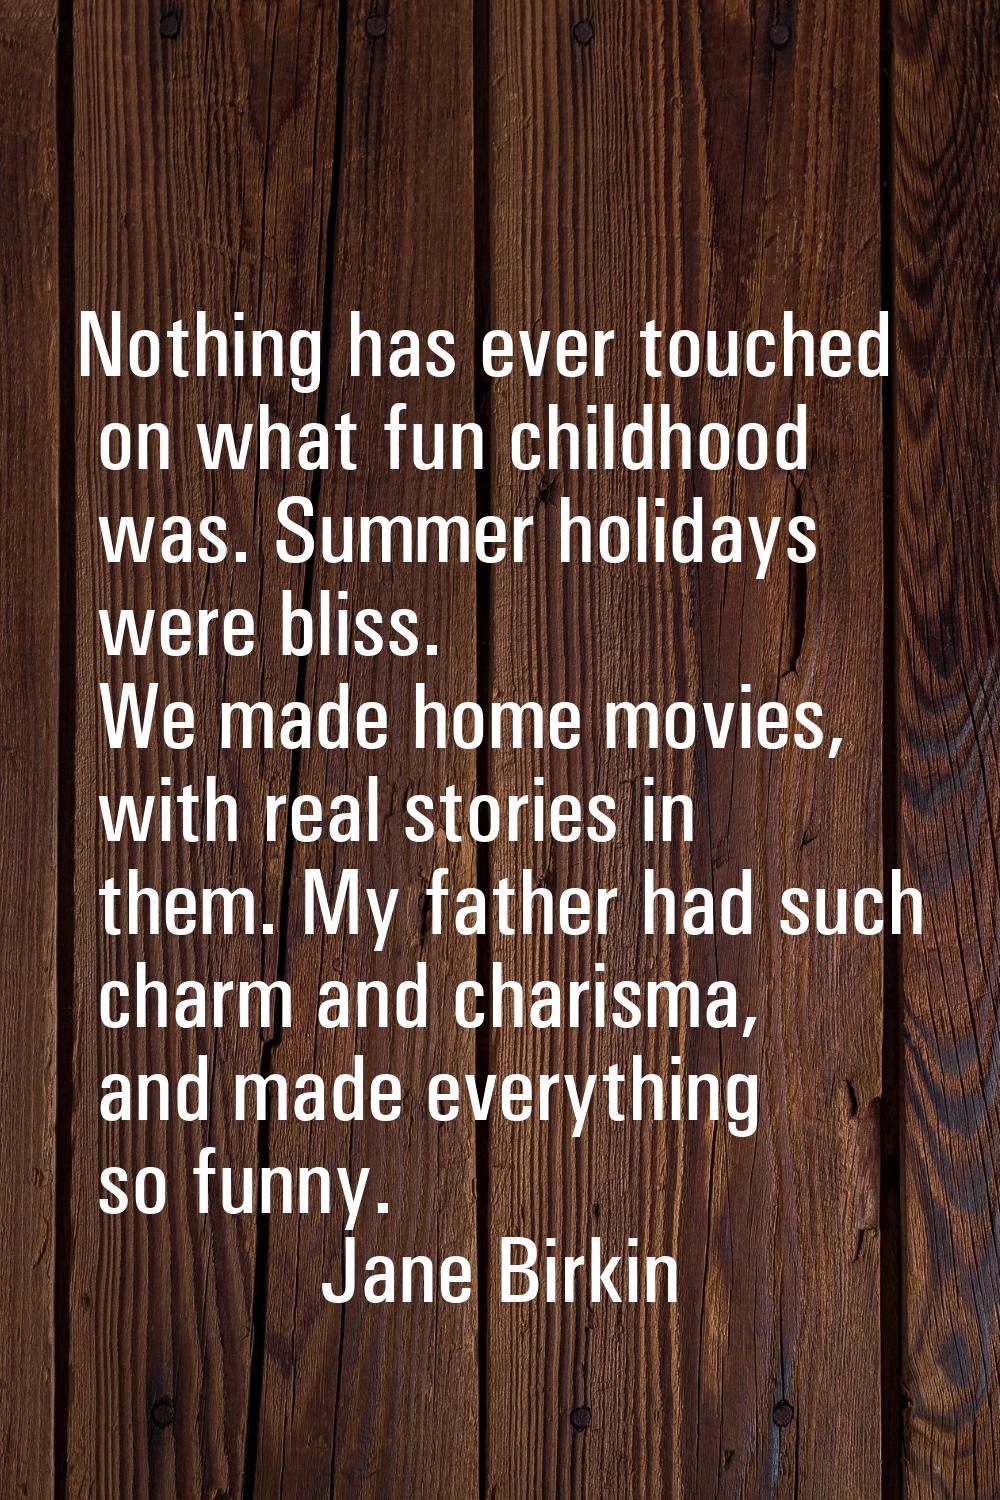 Nothing has ever touched on what fun childhood was. Summer holidays were bliss. We made home movies